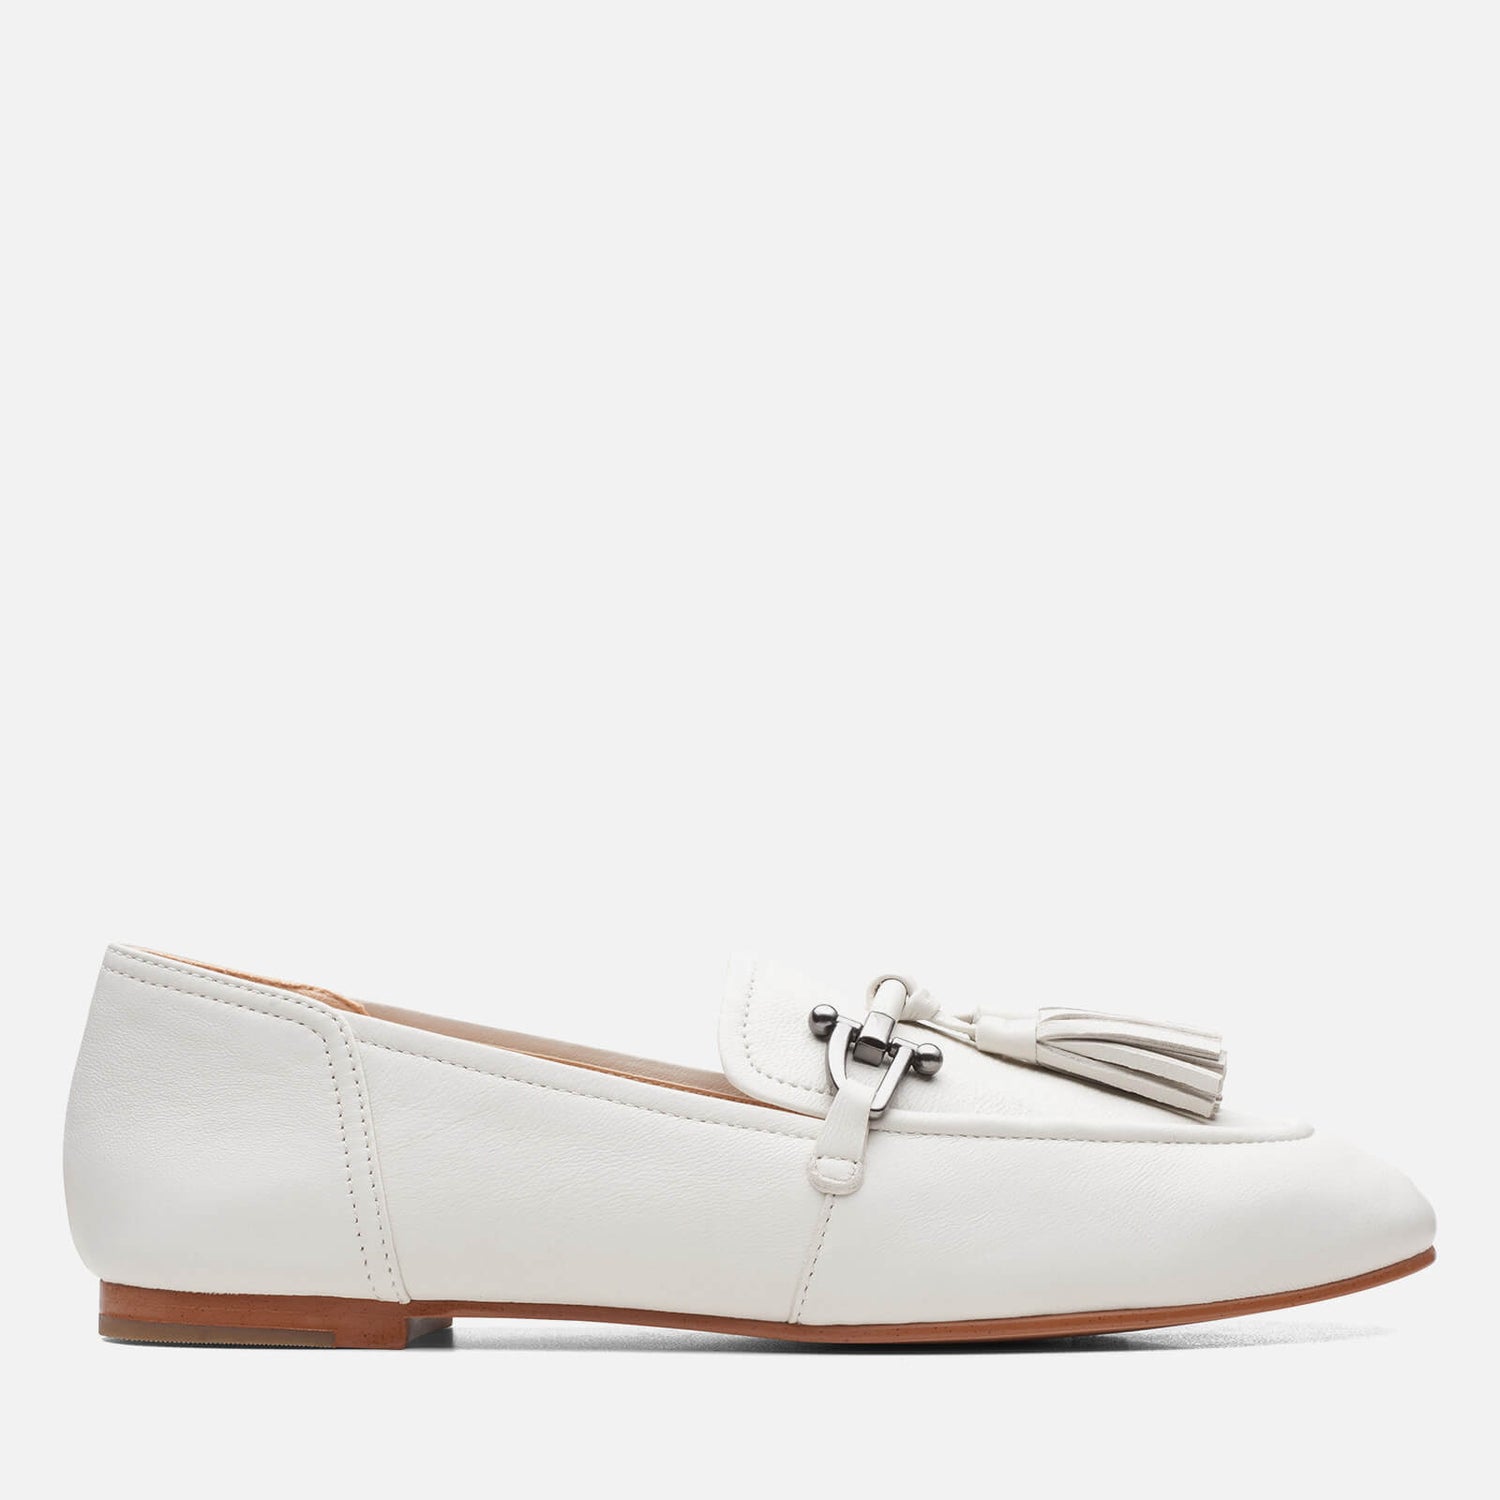 Clarks Women's Pure 2 Tassle Leather Loafers - White